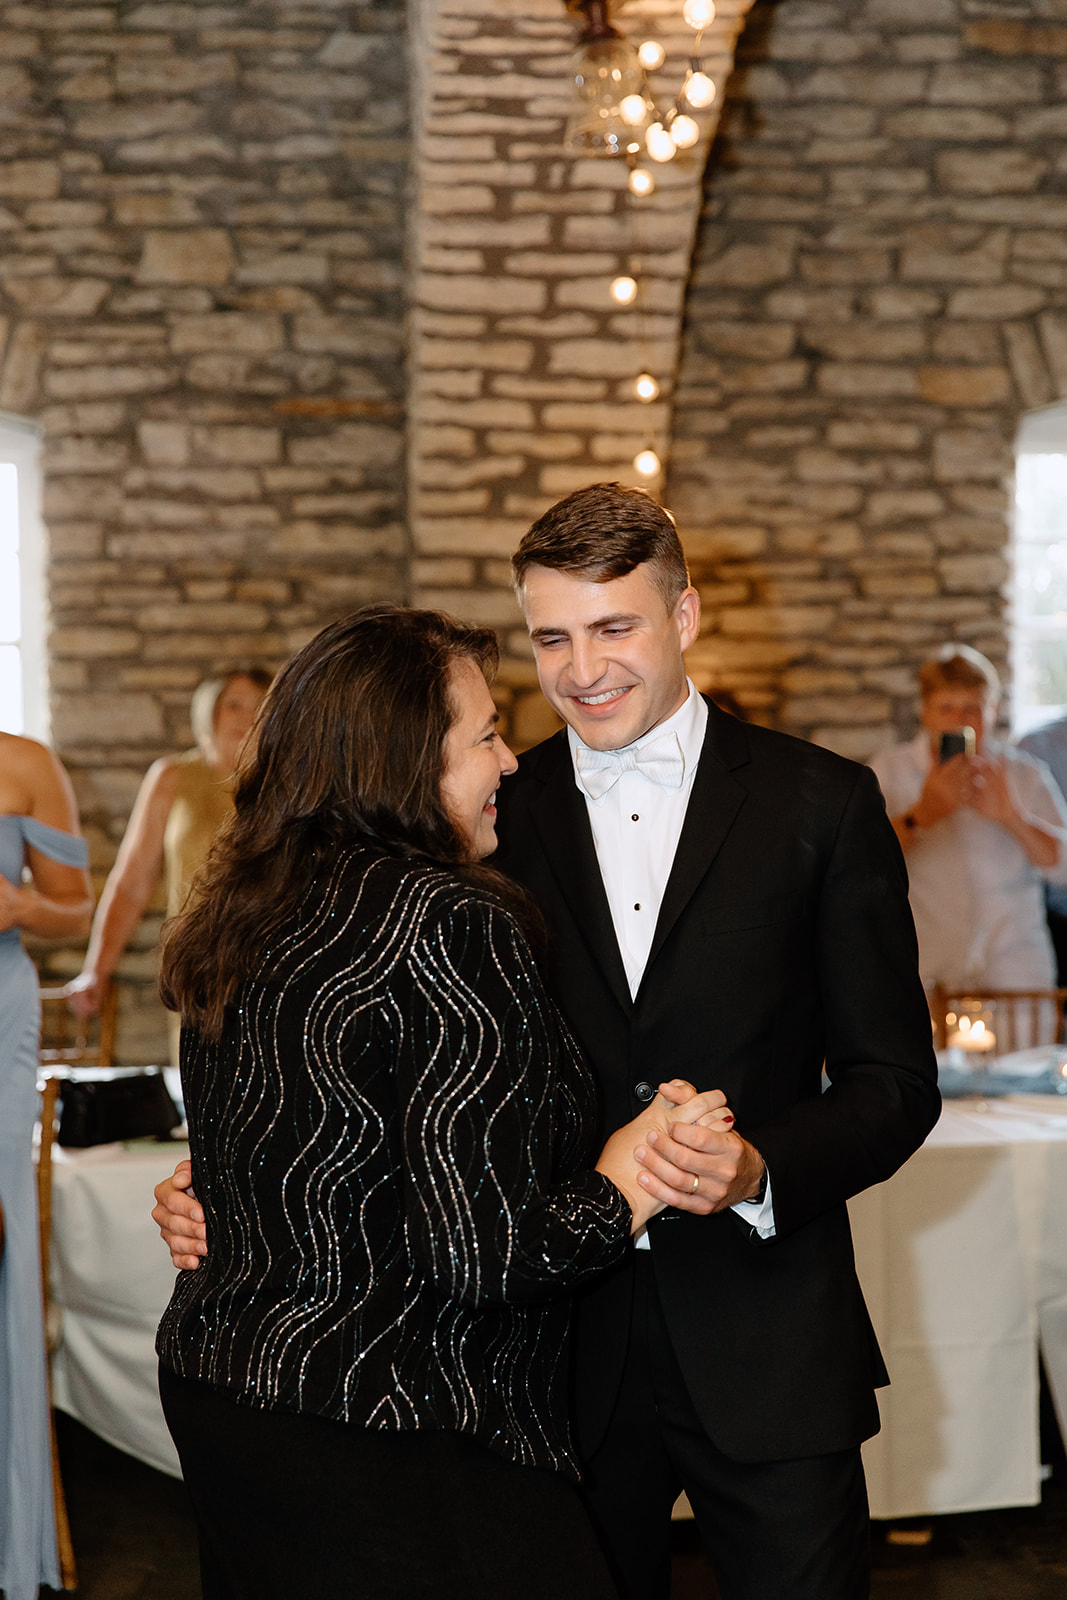 Groom and his mom dancing